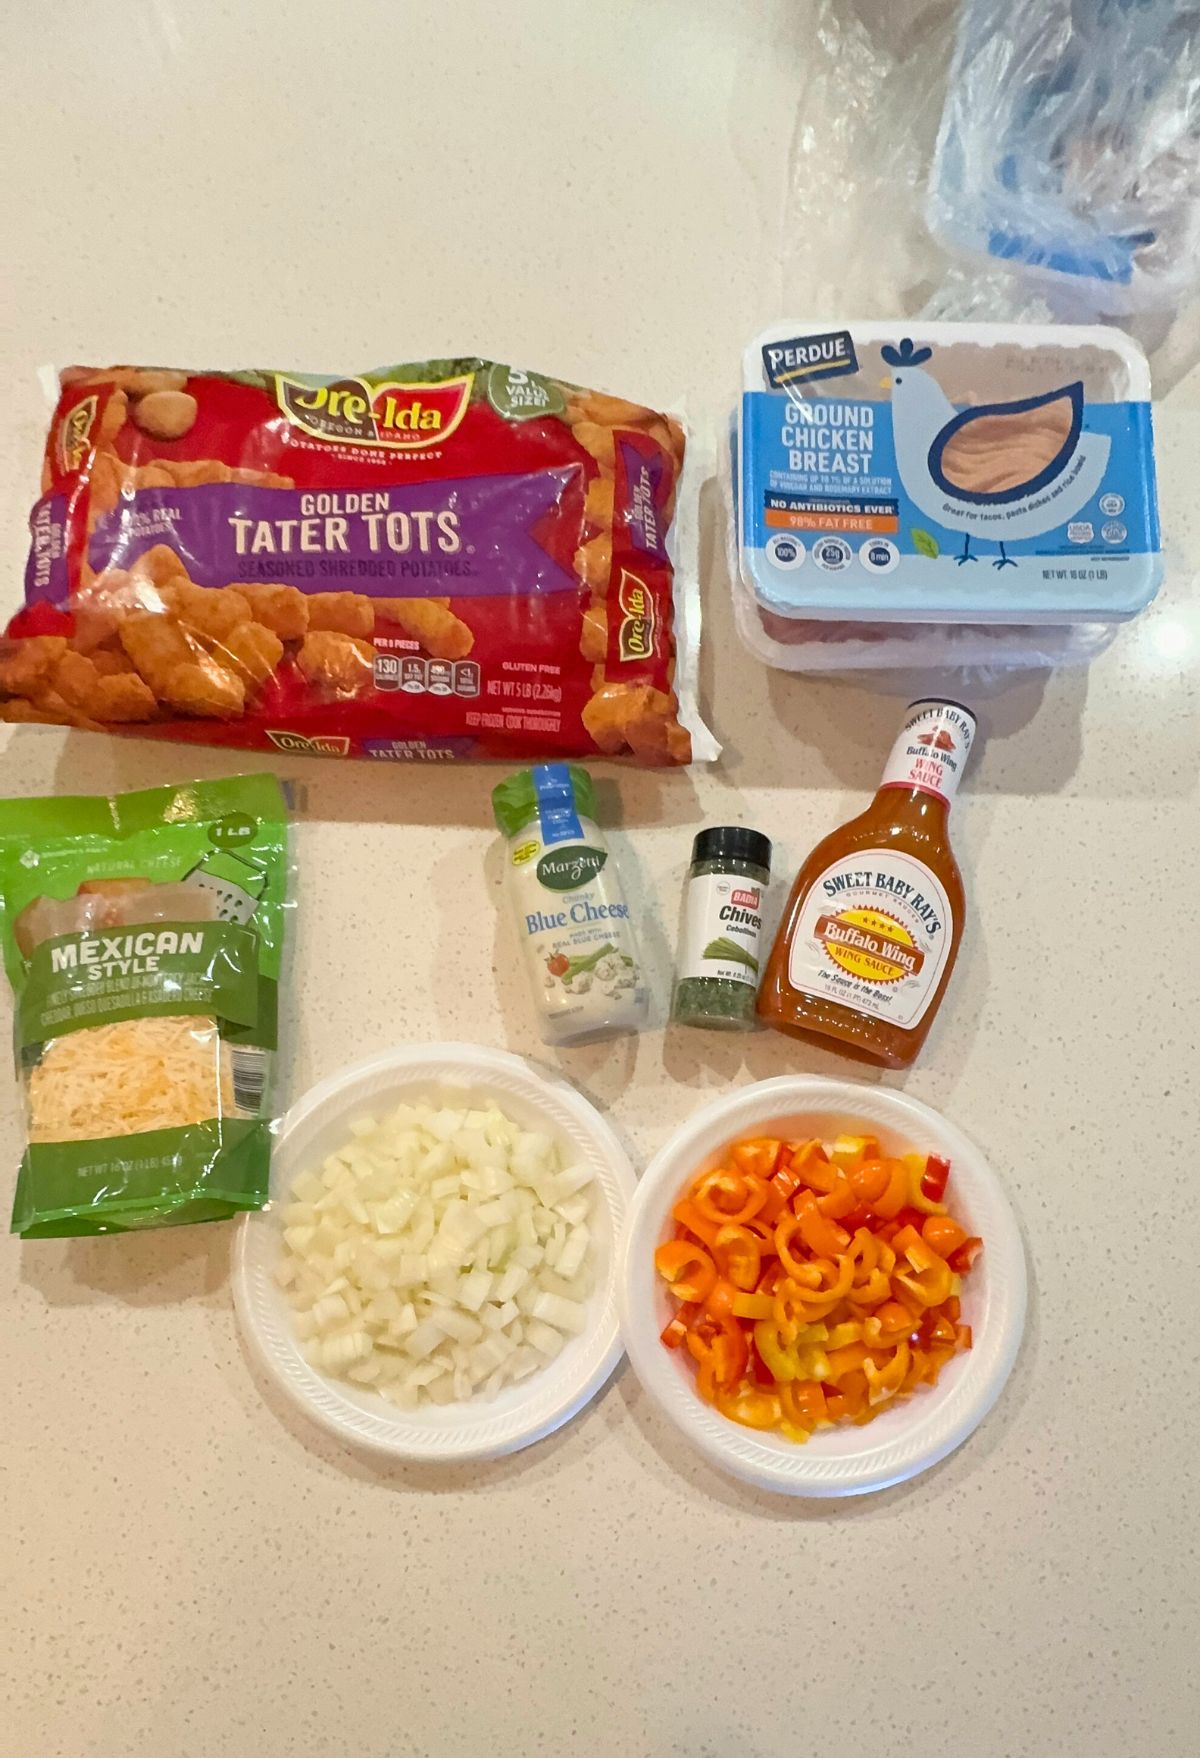 Ingredients for a meal preparation displayed on a kitchen counter, including tater tots, chicken breast, cheese, vegetables, and condiments.